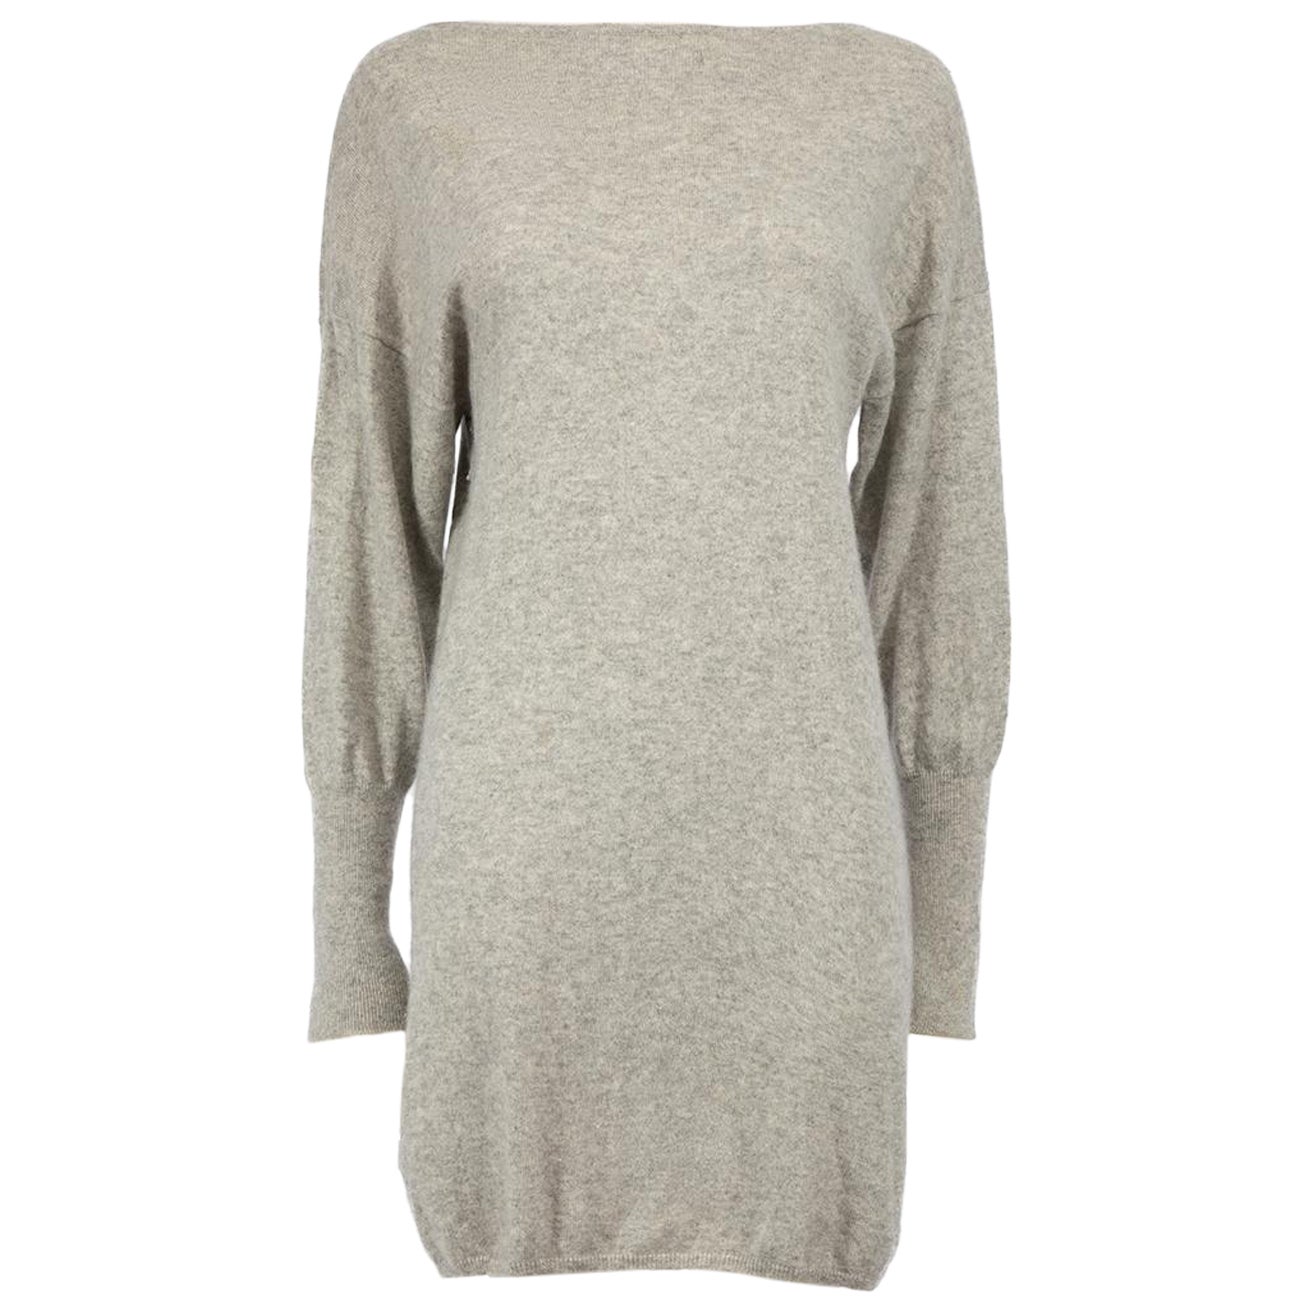 Allude Grey Wool Knitted Sweater Dress Size S For Sale